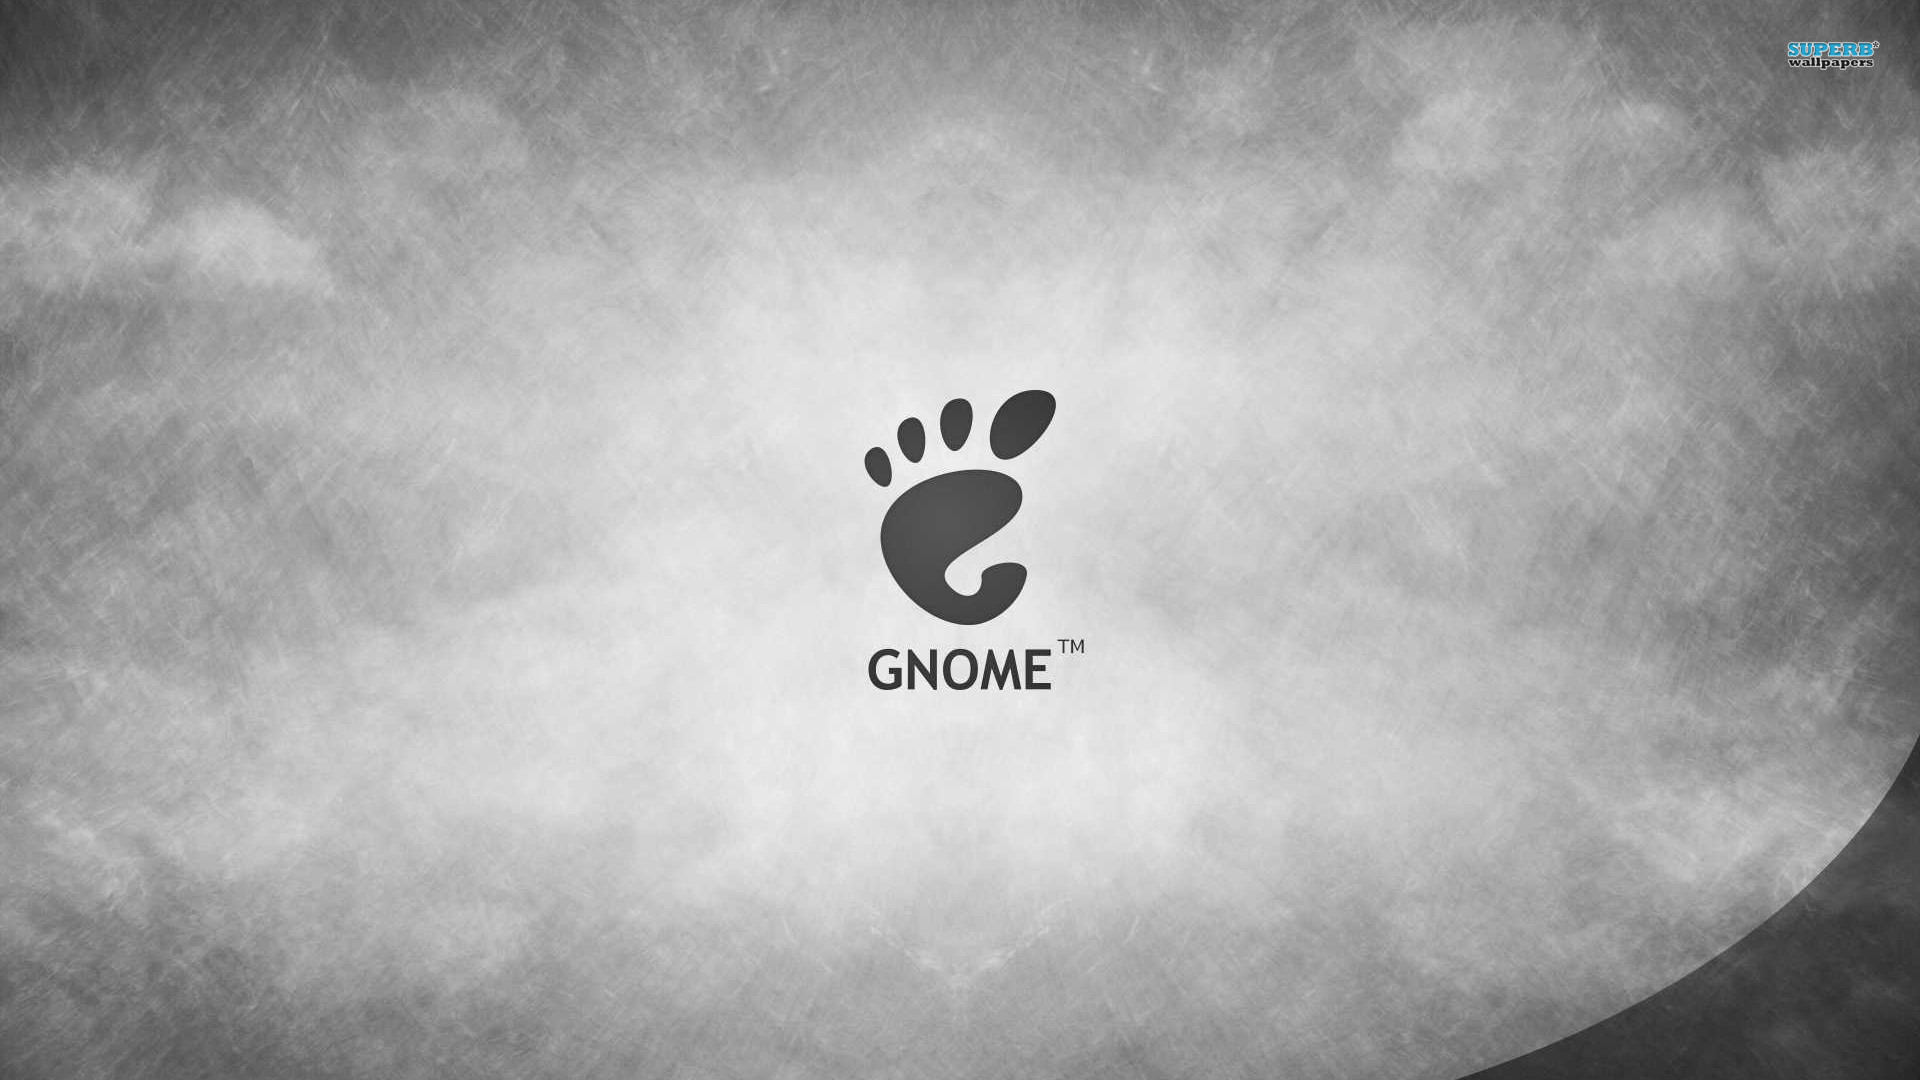 Gnome wallpaper - Computer wallpapers - #11705